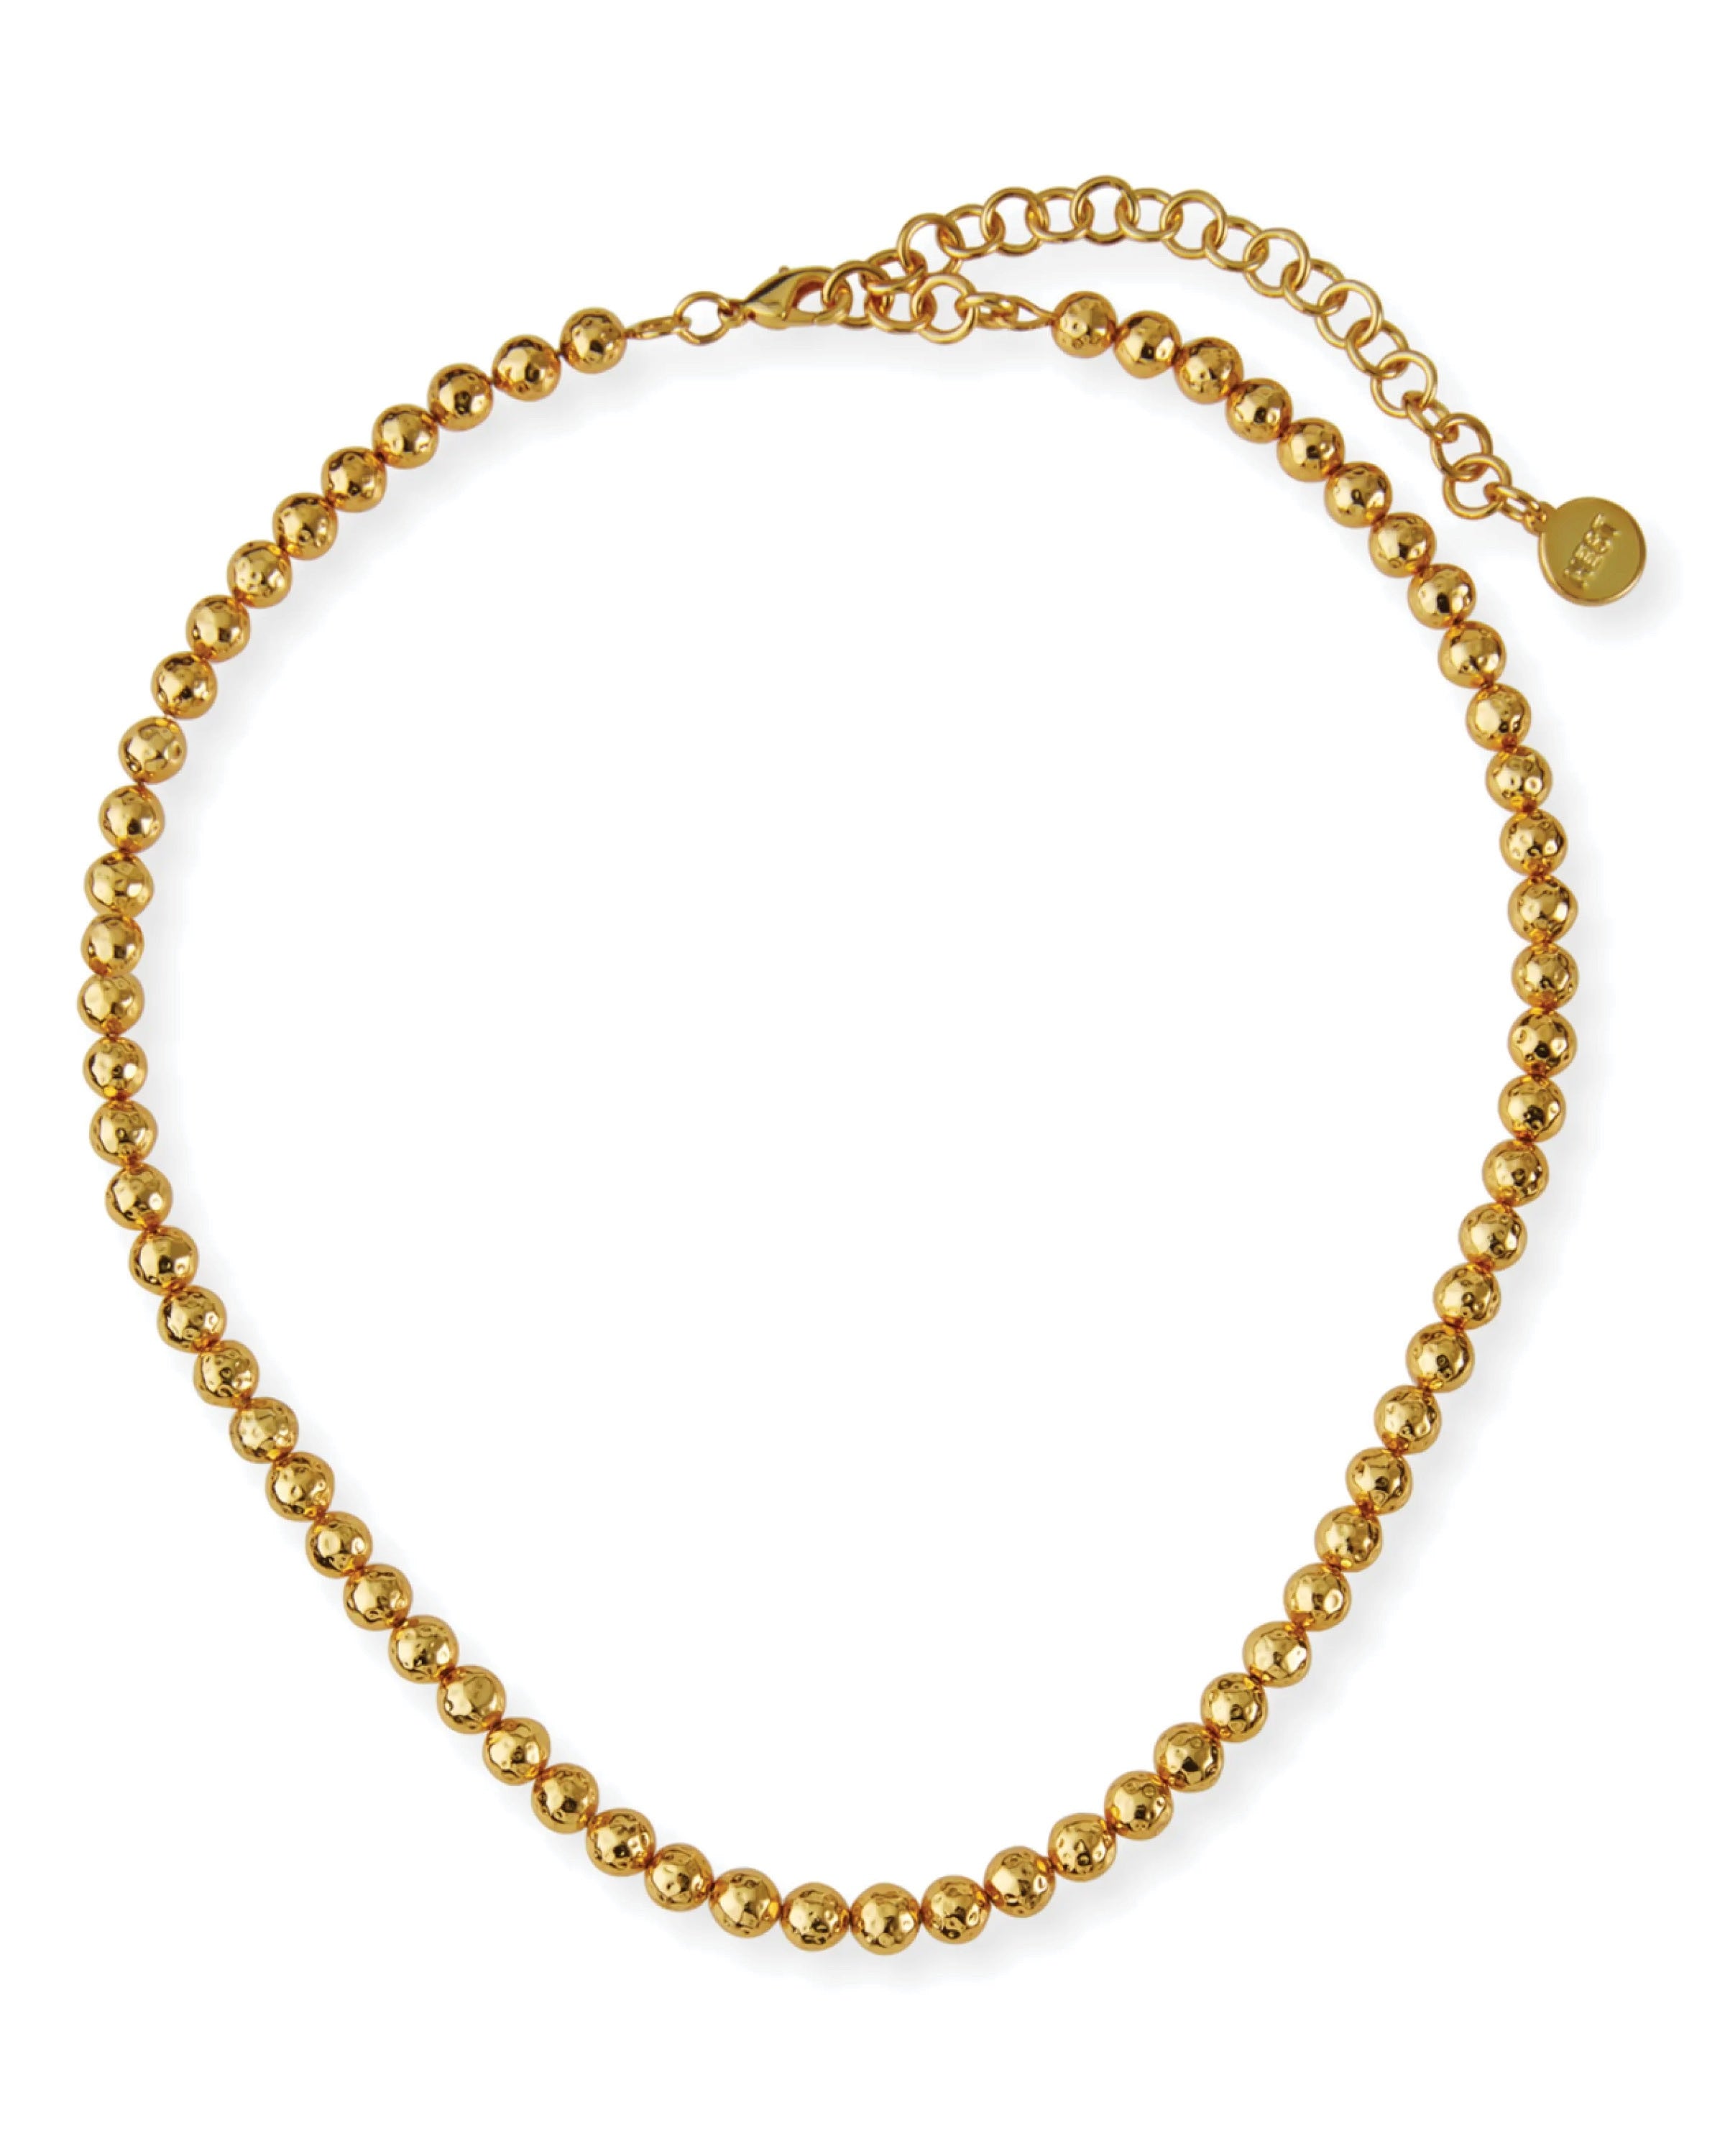 Hammered Gold Beaded Necklace